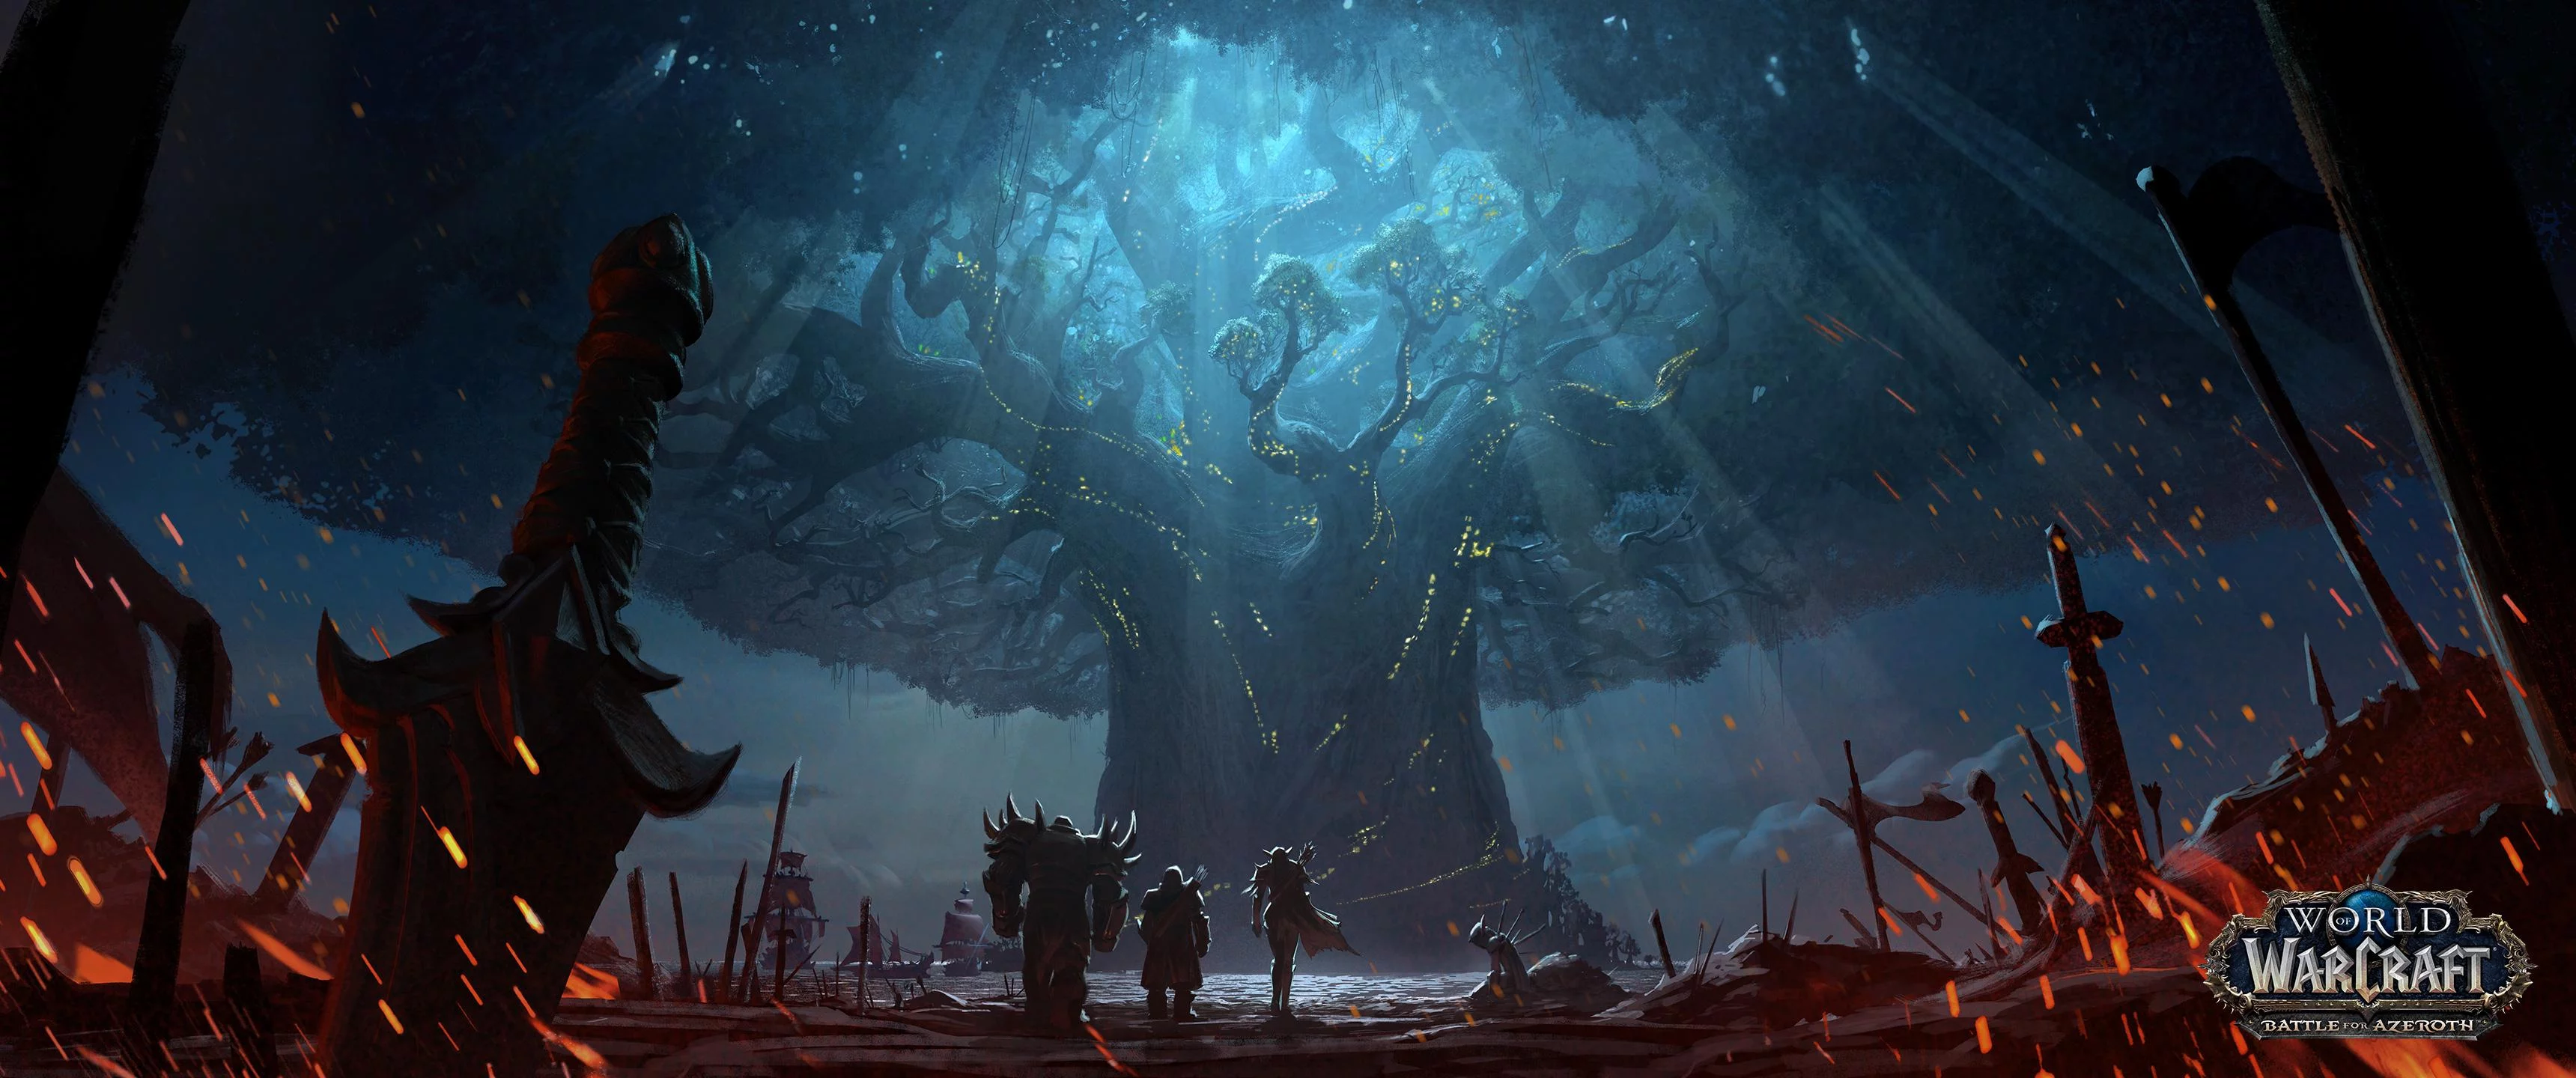 Free Download World Of Warcraft Wallpapers Naruto 1920x1080 Page 2110737 (3440 x 1440)